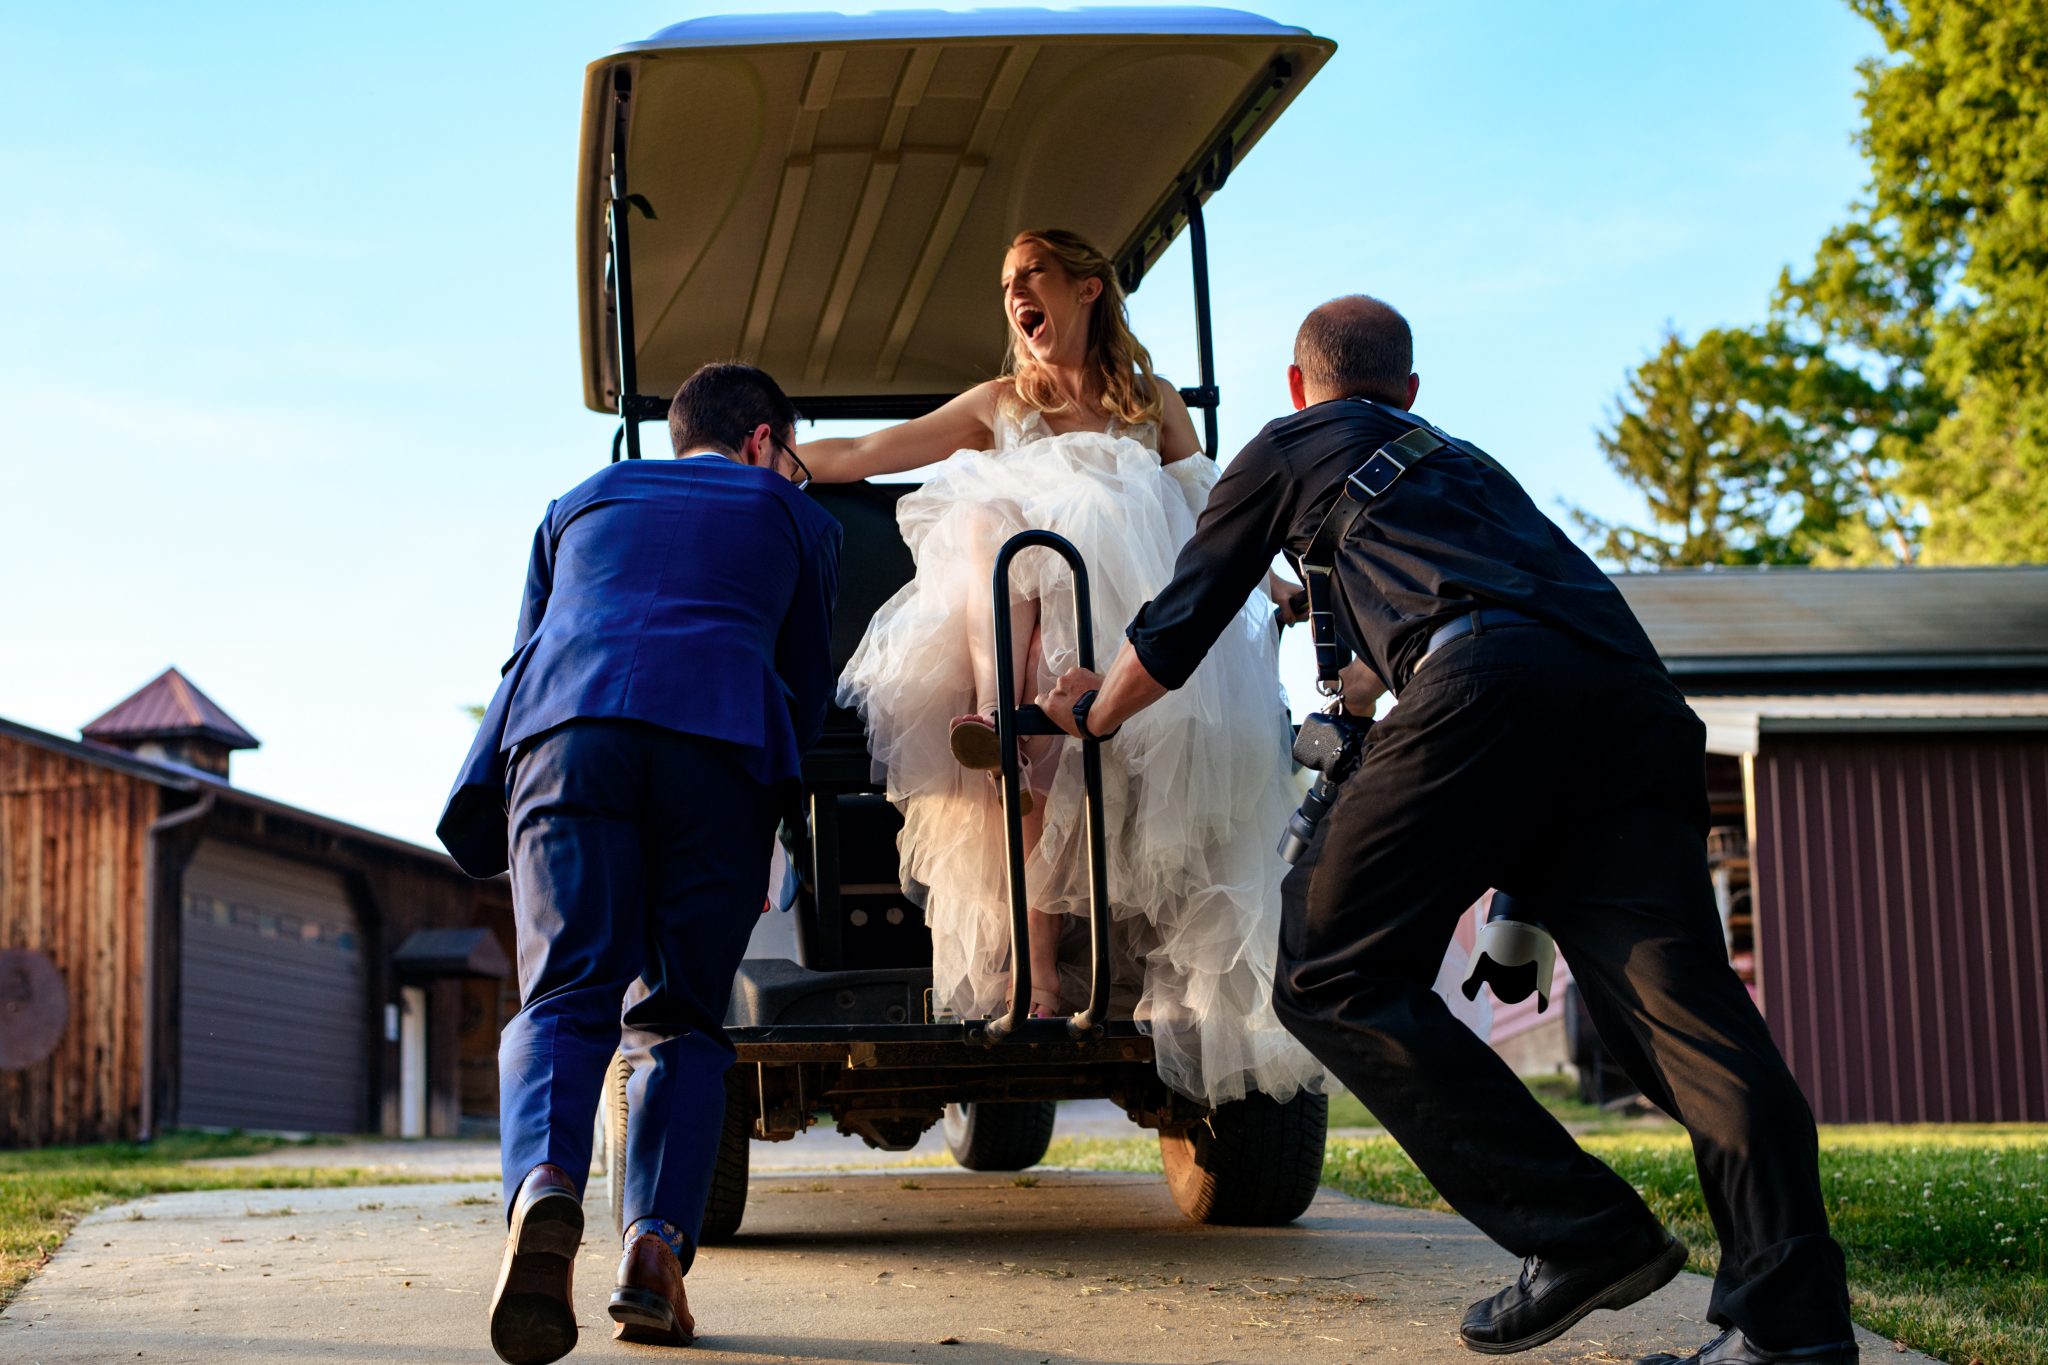 Groom and Photographer pushing golf cart while bride laughs shot while being a second photographer